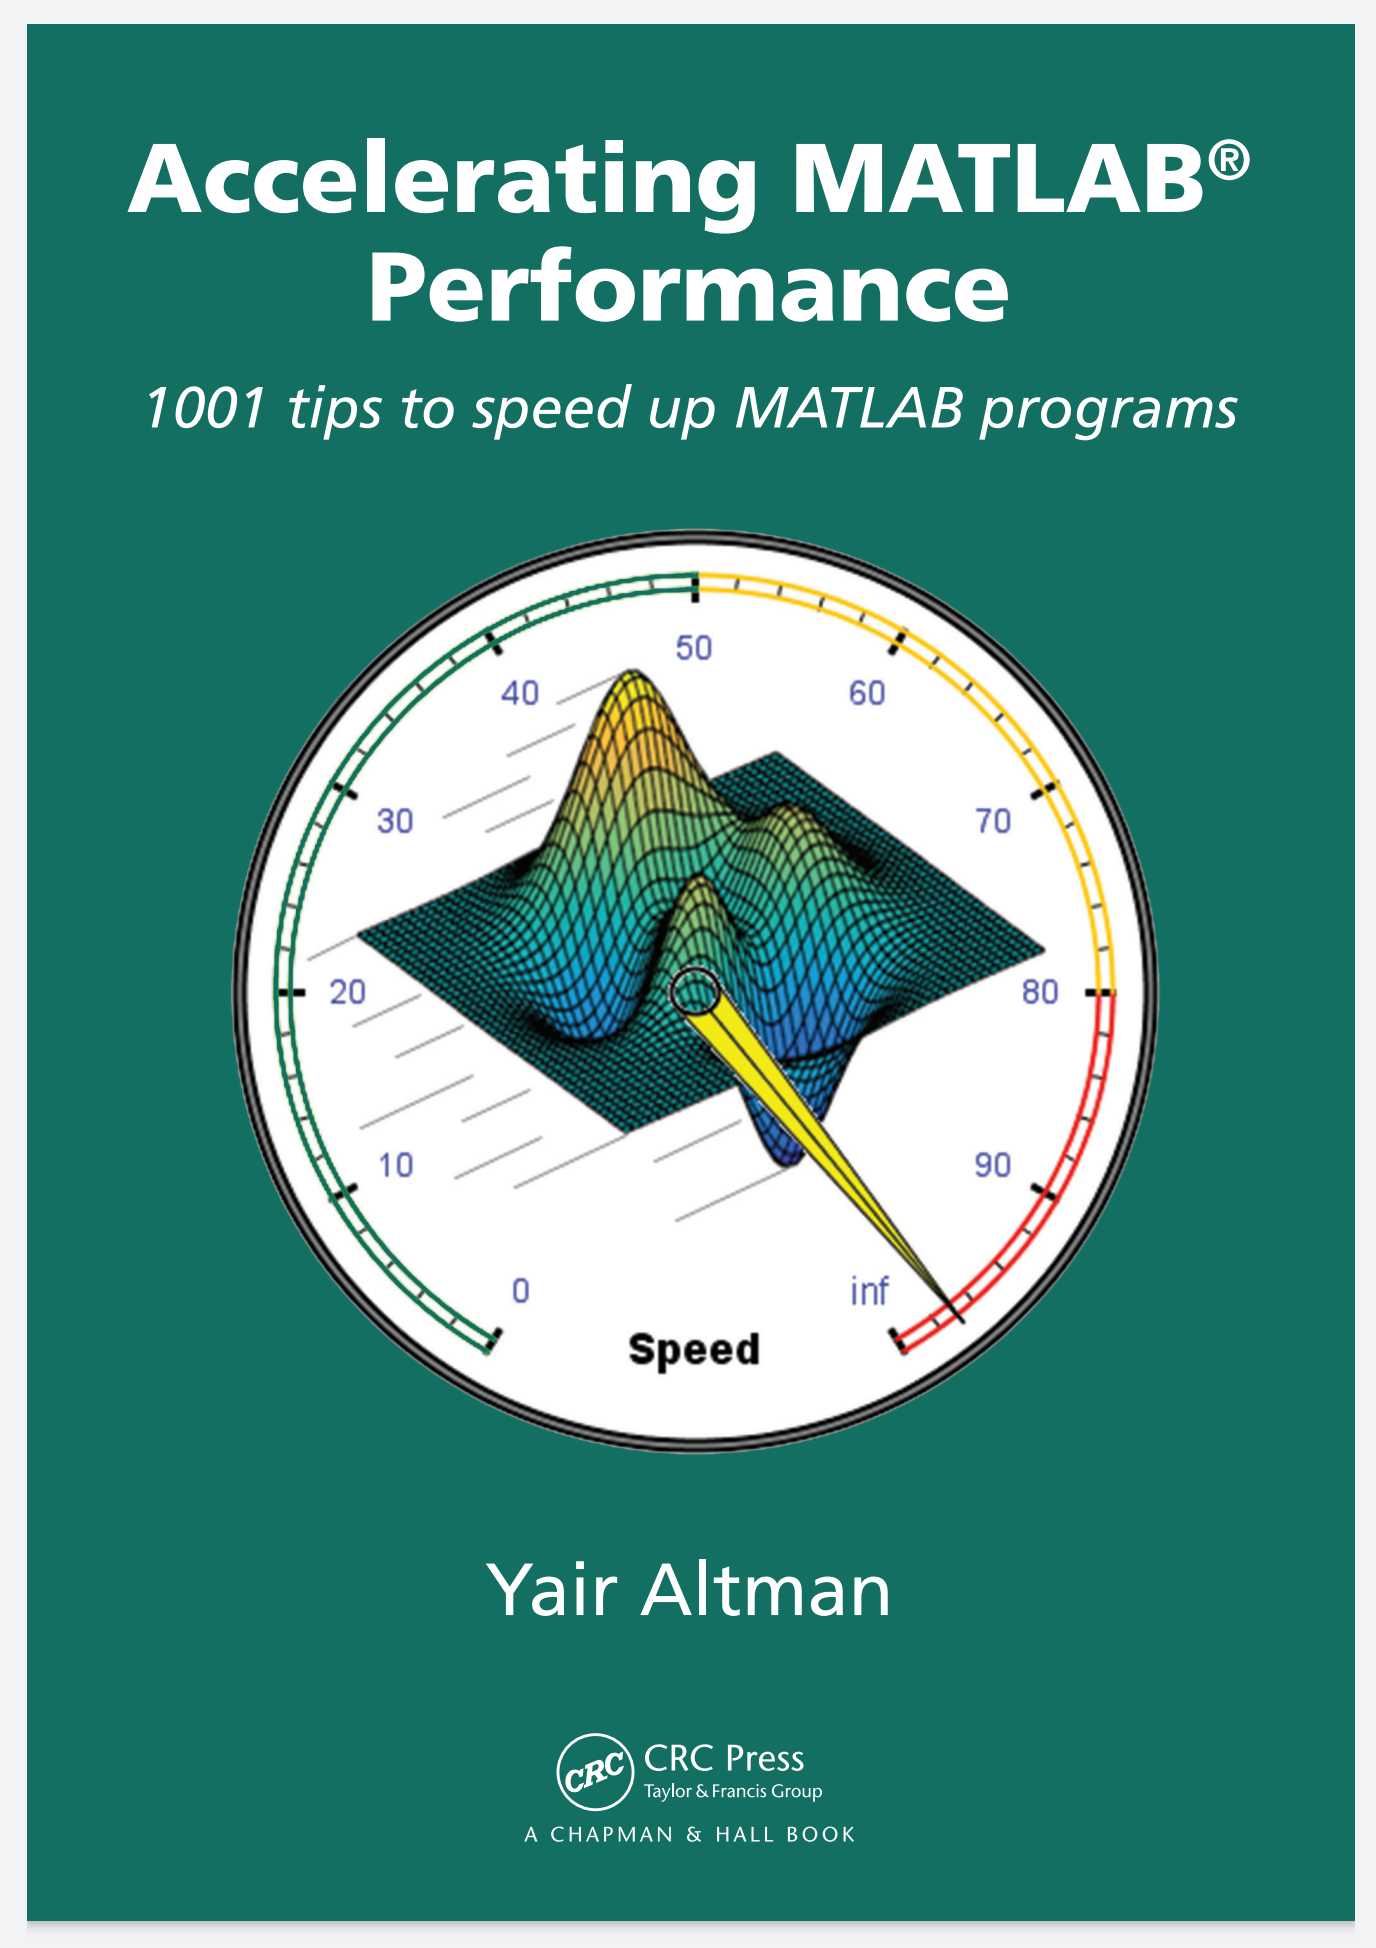 Accelerating MATLAB Performance: 1001 tips to speed up MATLAB programs 1st Edition by Yair M. Altman